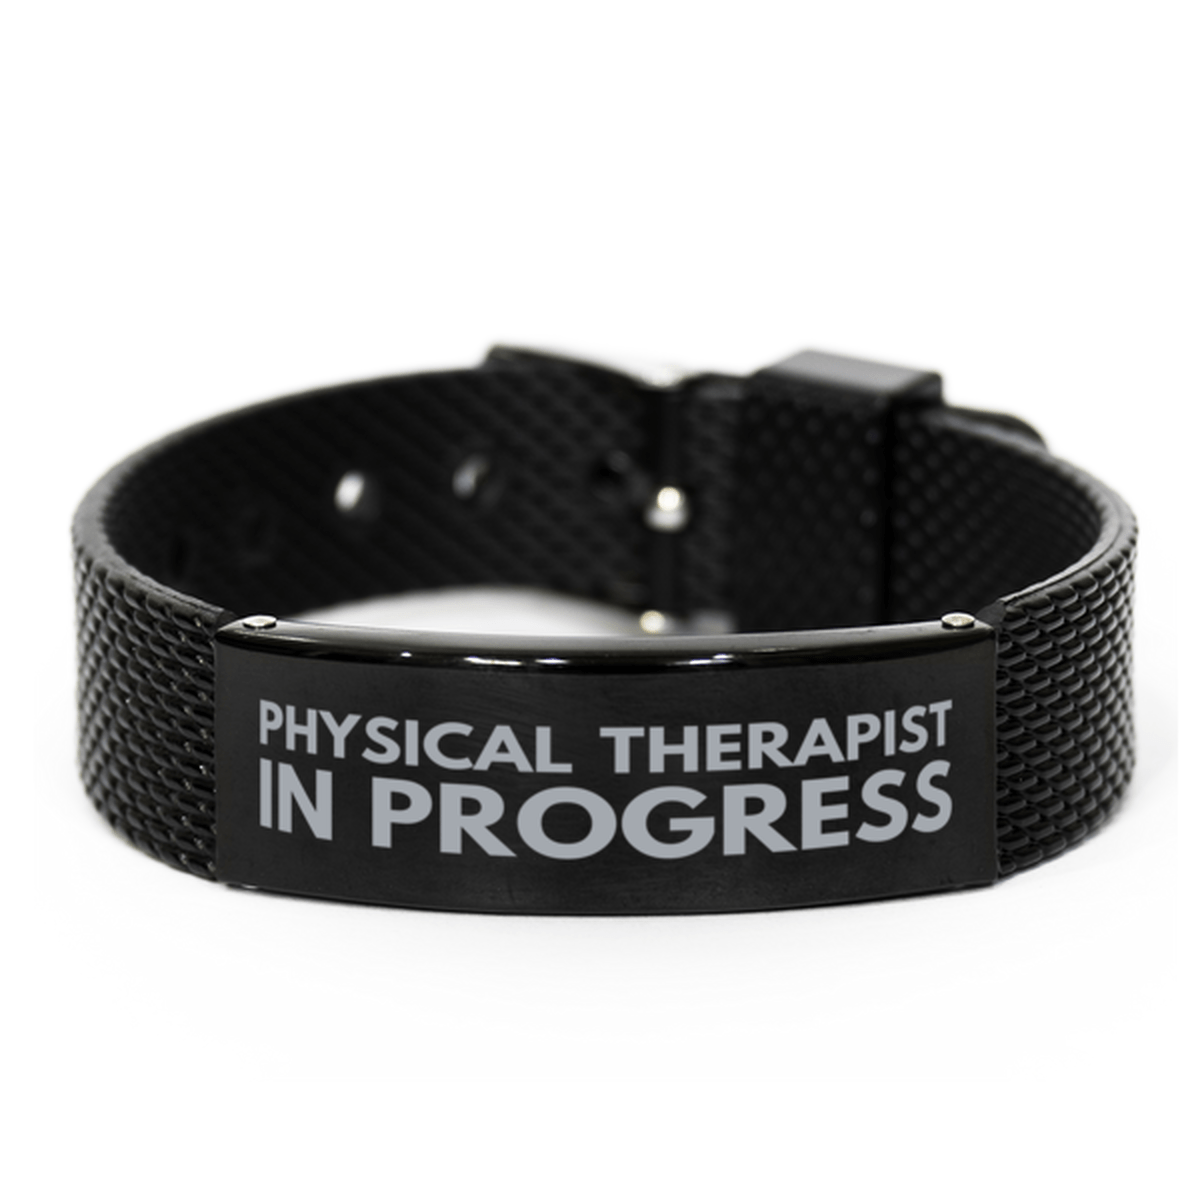 Inspirational Physical Therapist Black Shark Mesh Bracelet, Physical Therapist In Progress, Best Graduation Gifts for Students